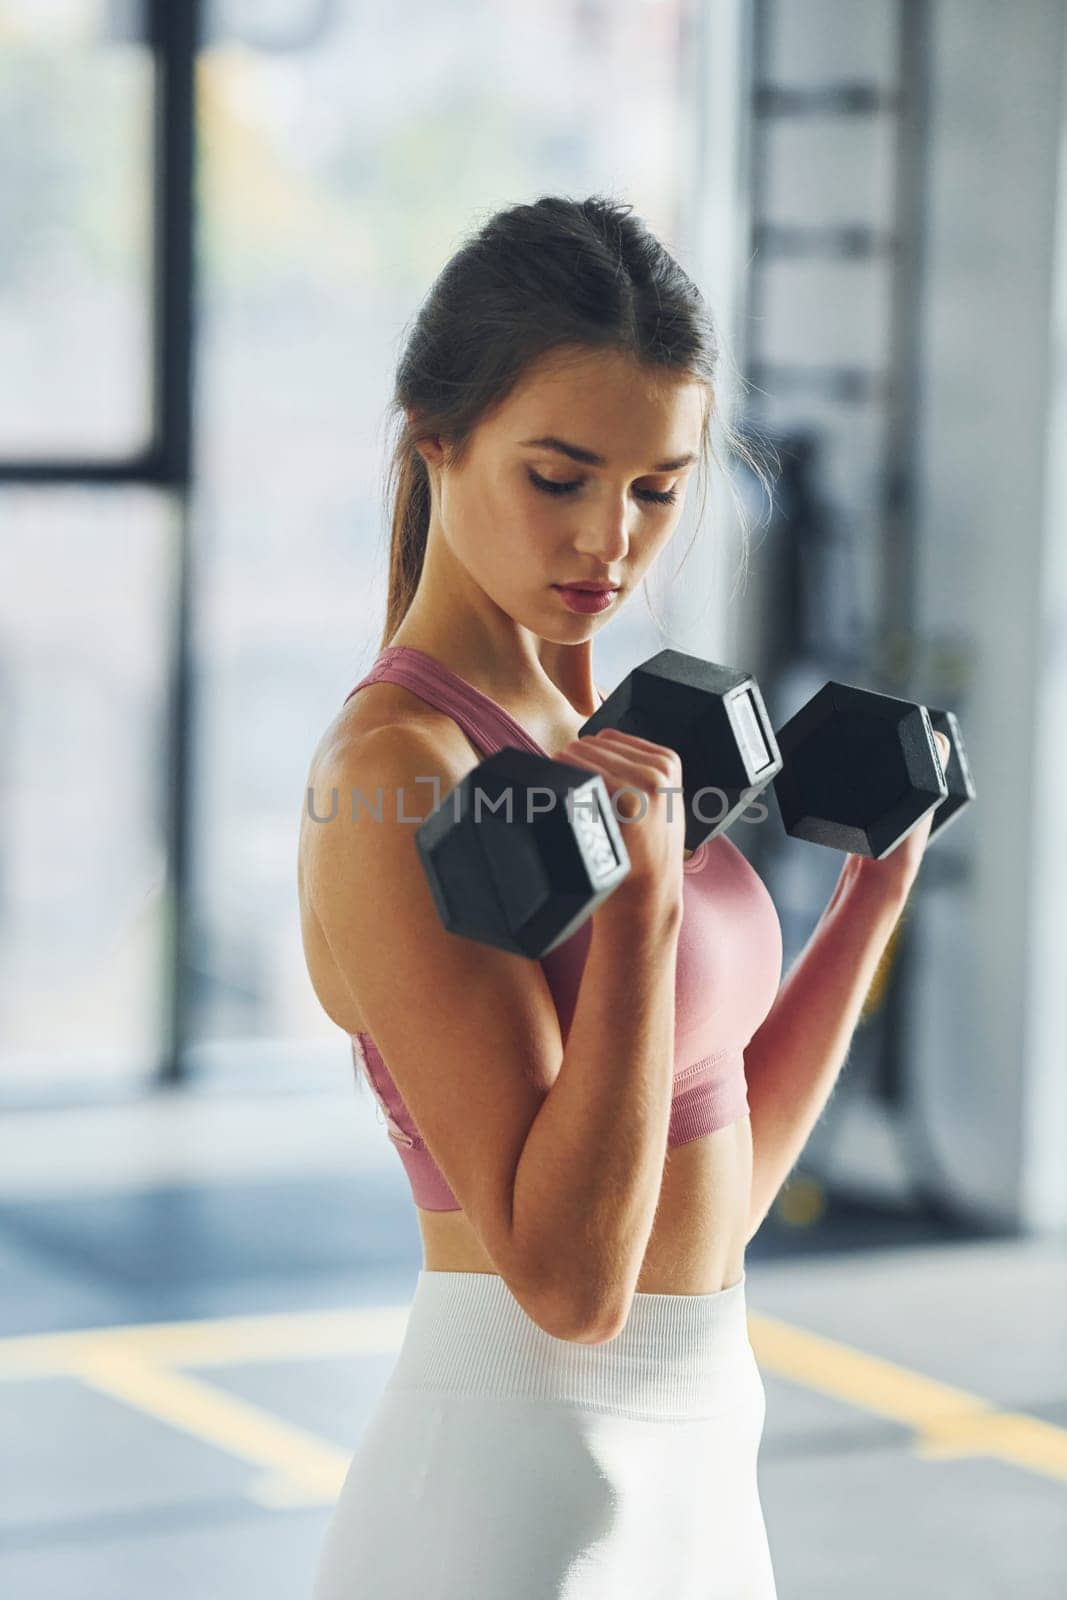 Holding dumbbells. Beautiful young woman with slim body type is in the gym.